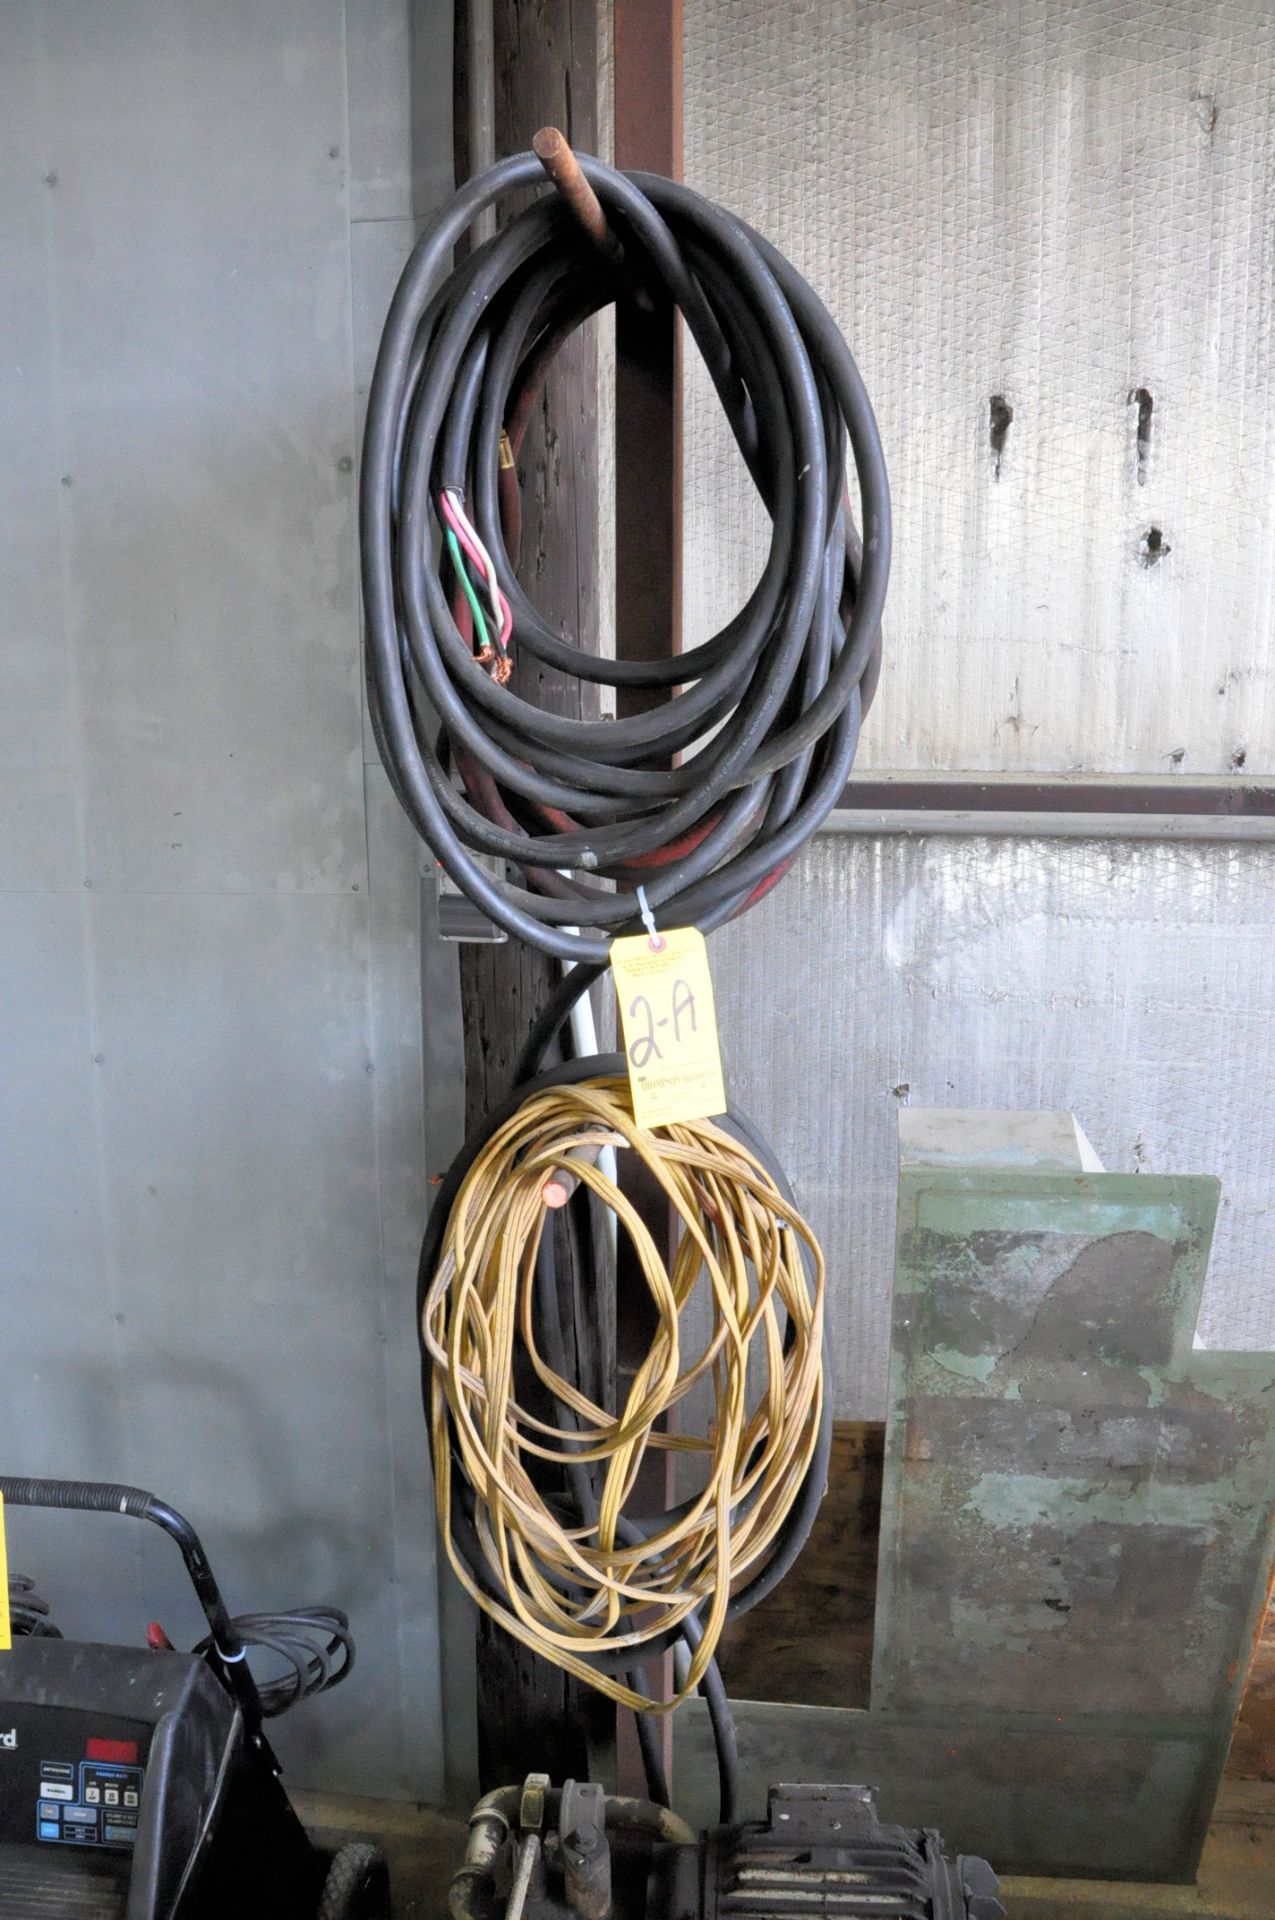 Lot-Extension Cords and Wires